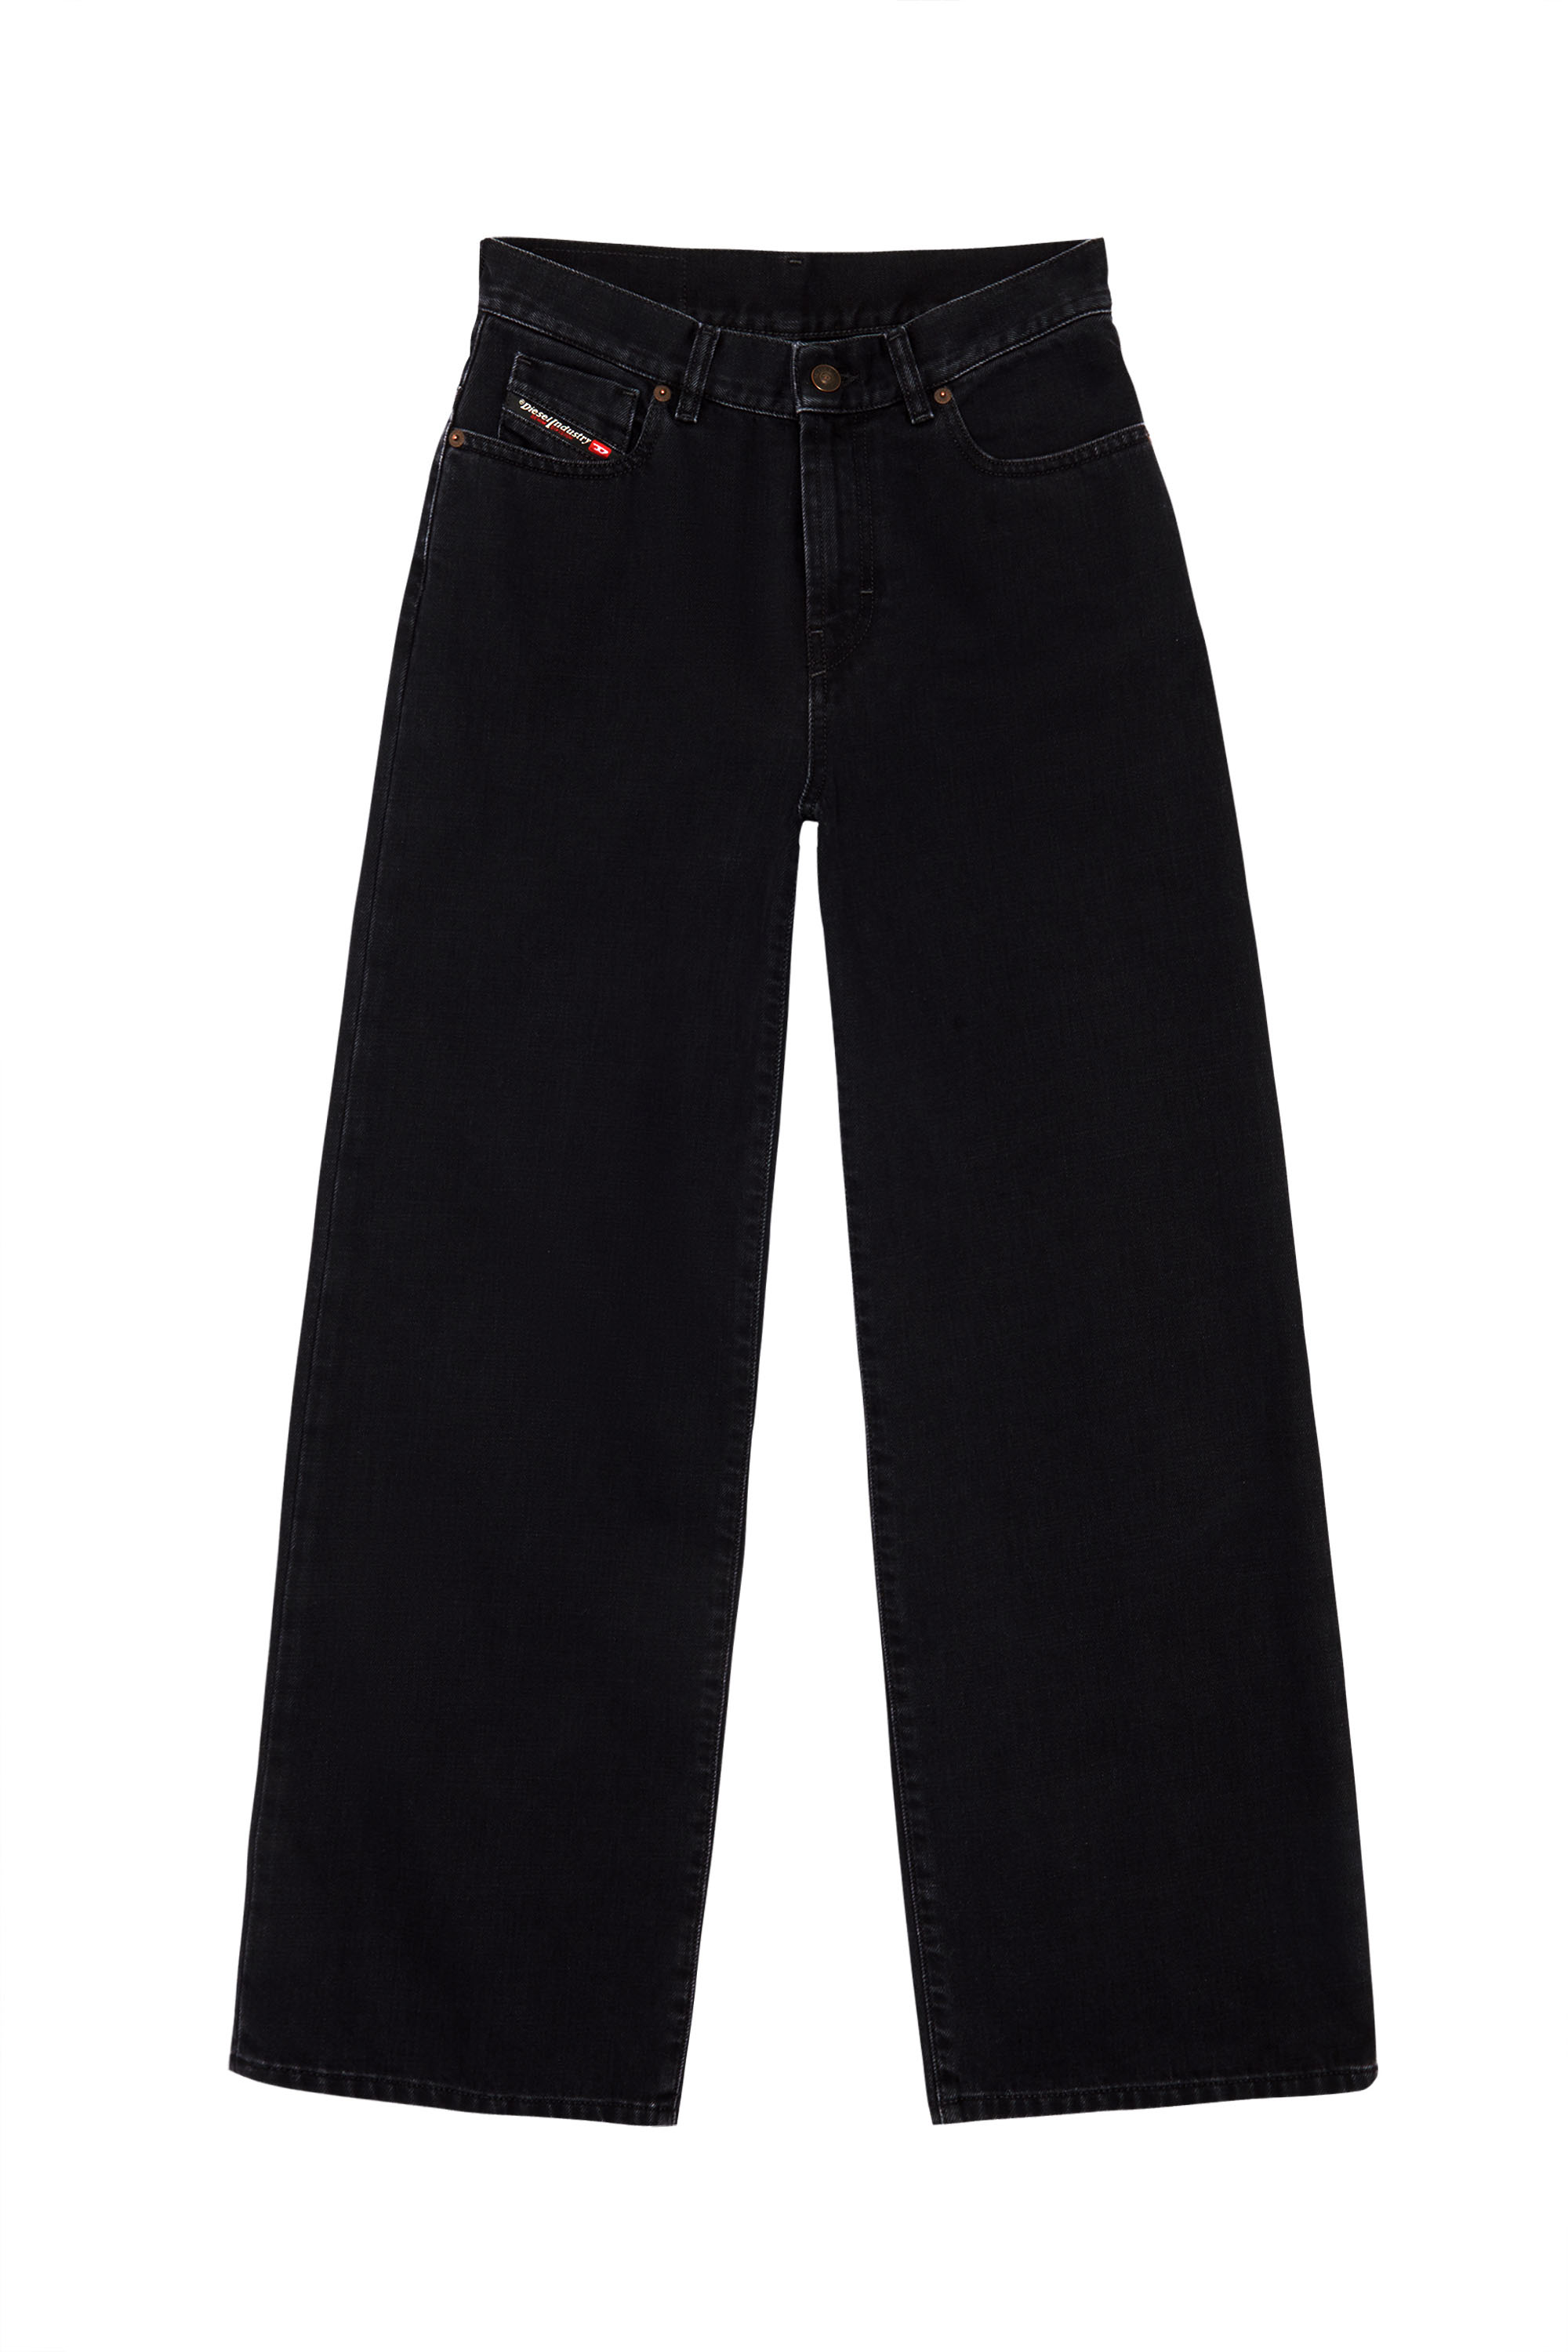 2000 WIDEE Z09RL Bootcut and Flare Jeans, Nero/Grigio scuro - Jeans